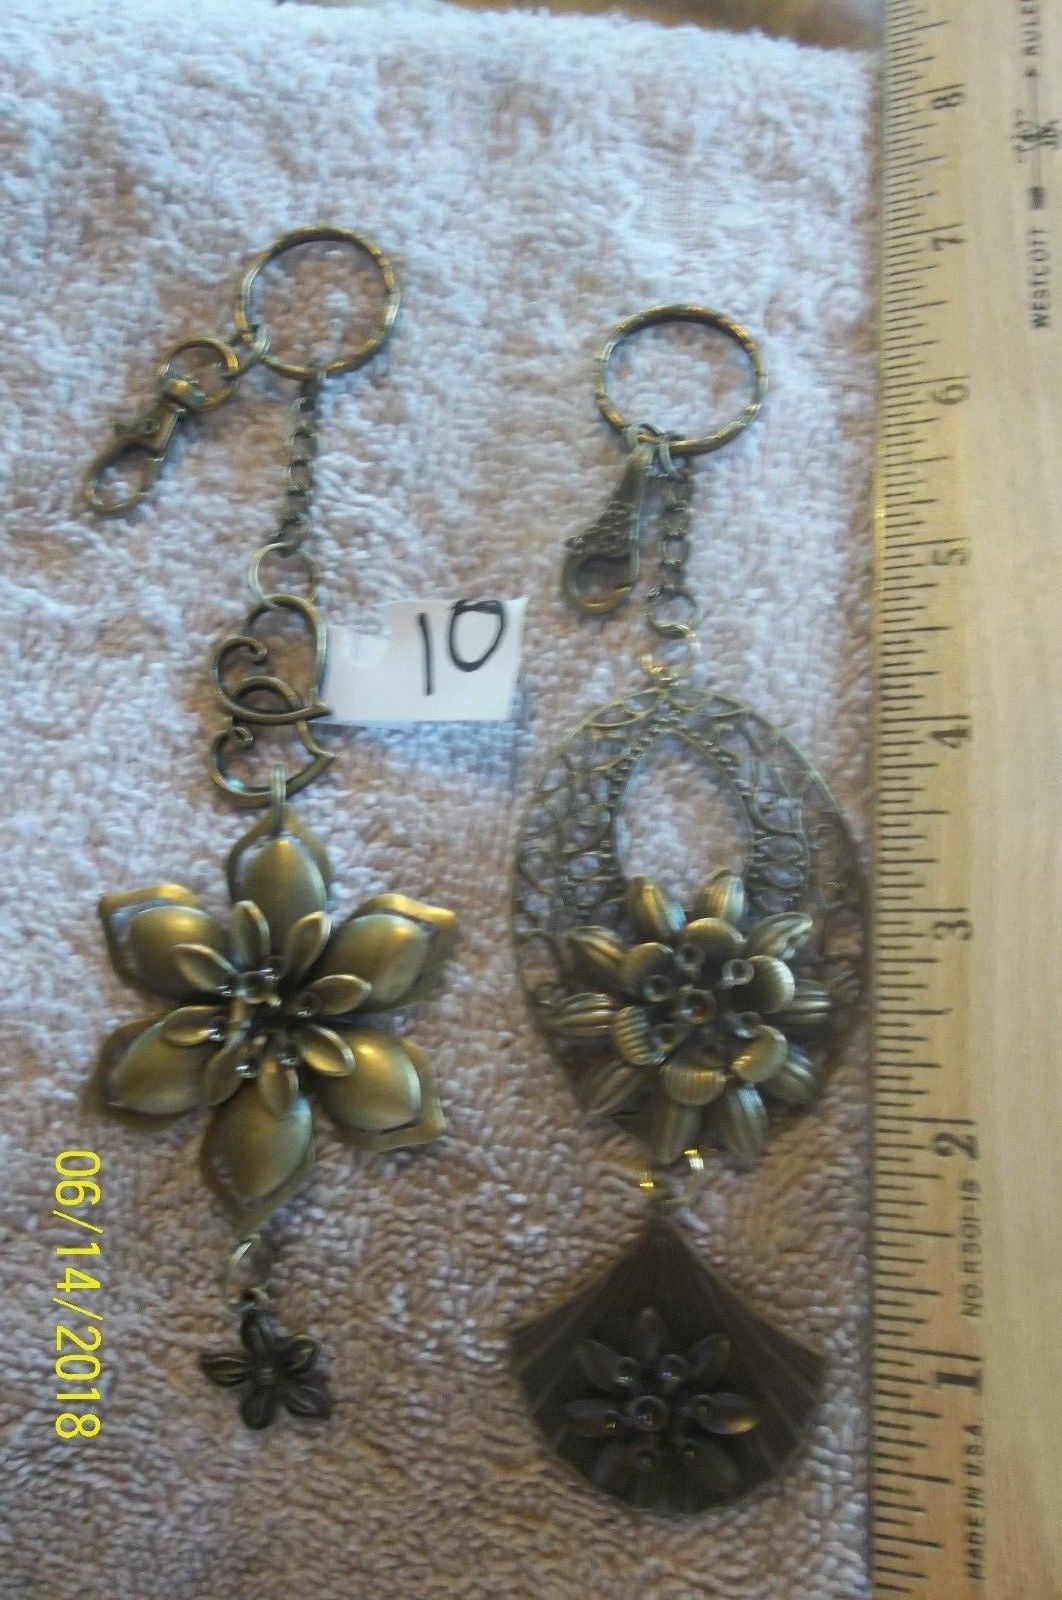 Primary image for <><  purse jewelry bronze color keychain backpack filigree charm  10 lot of 2